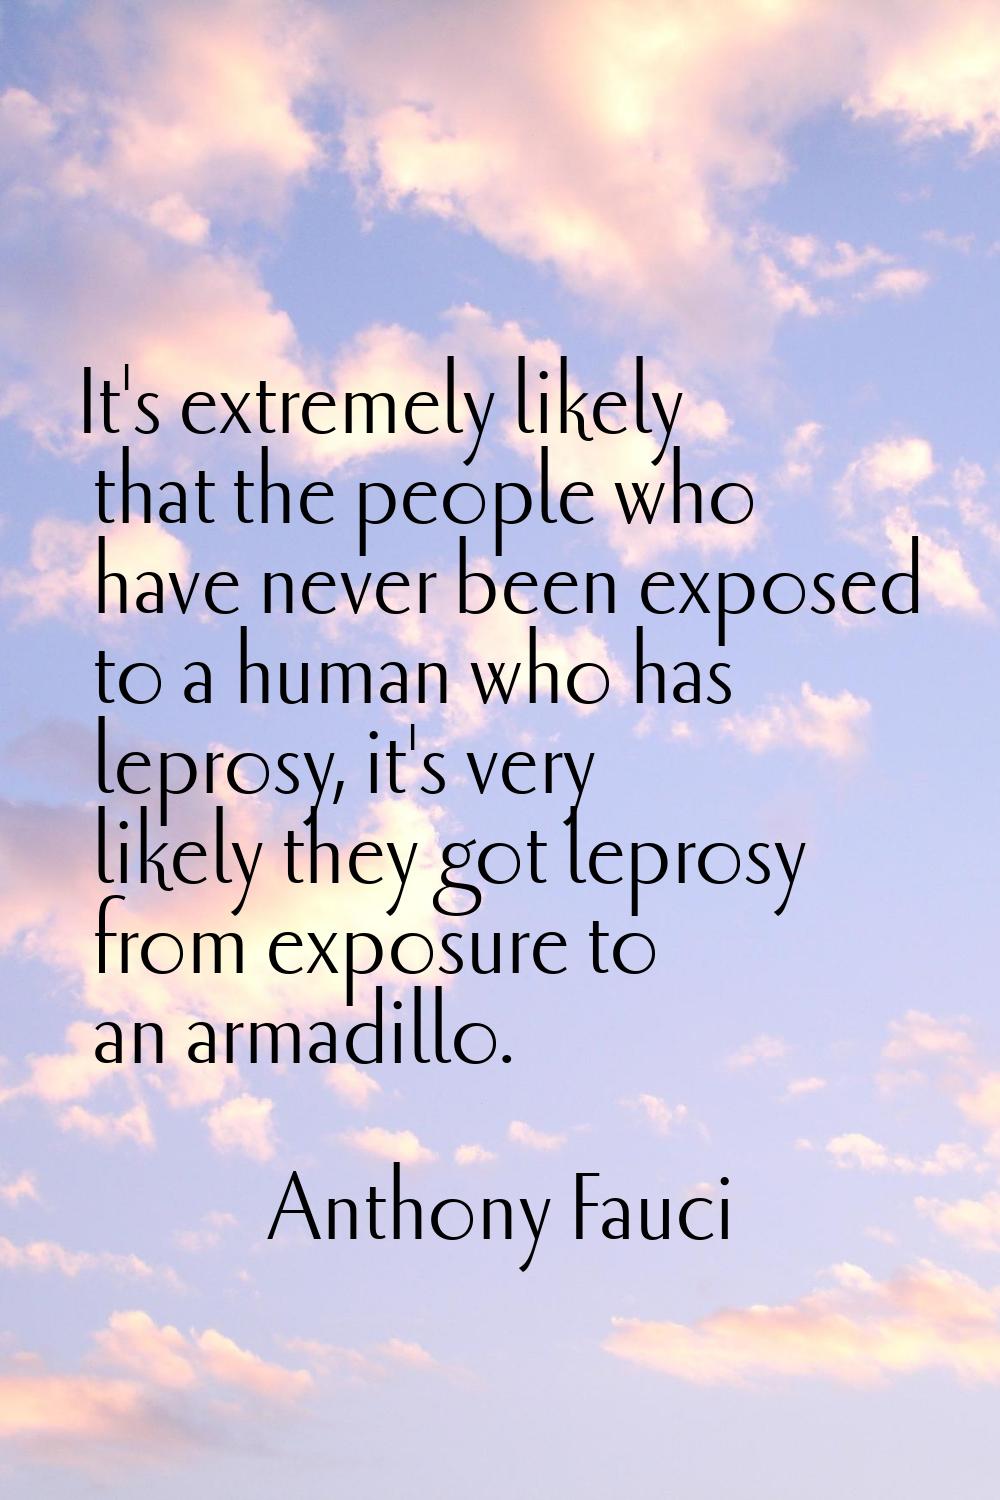 It's extremely likely that the people who have never been exposed to a human who has leprosy, it's 